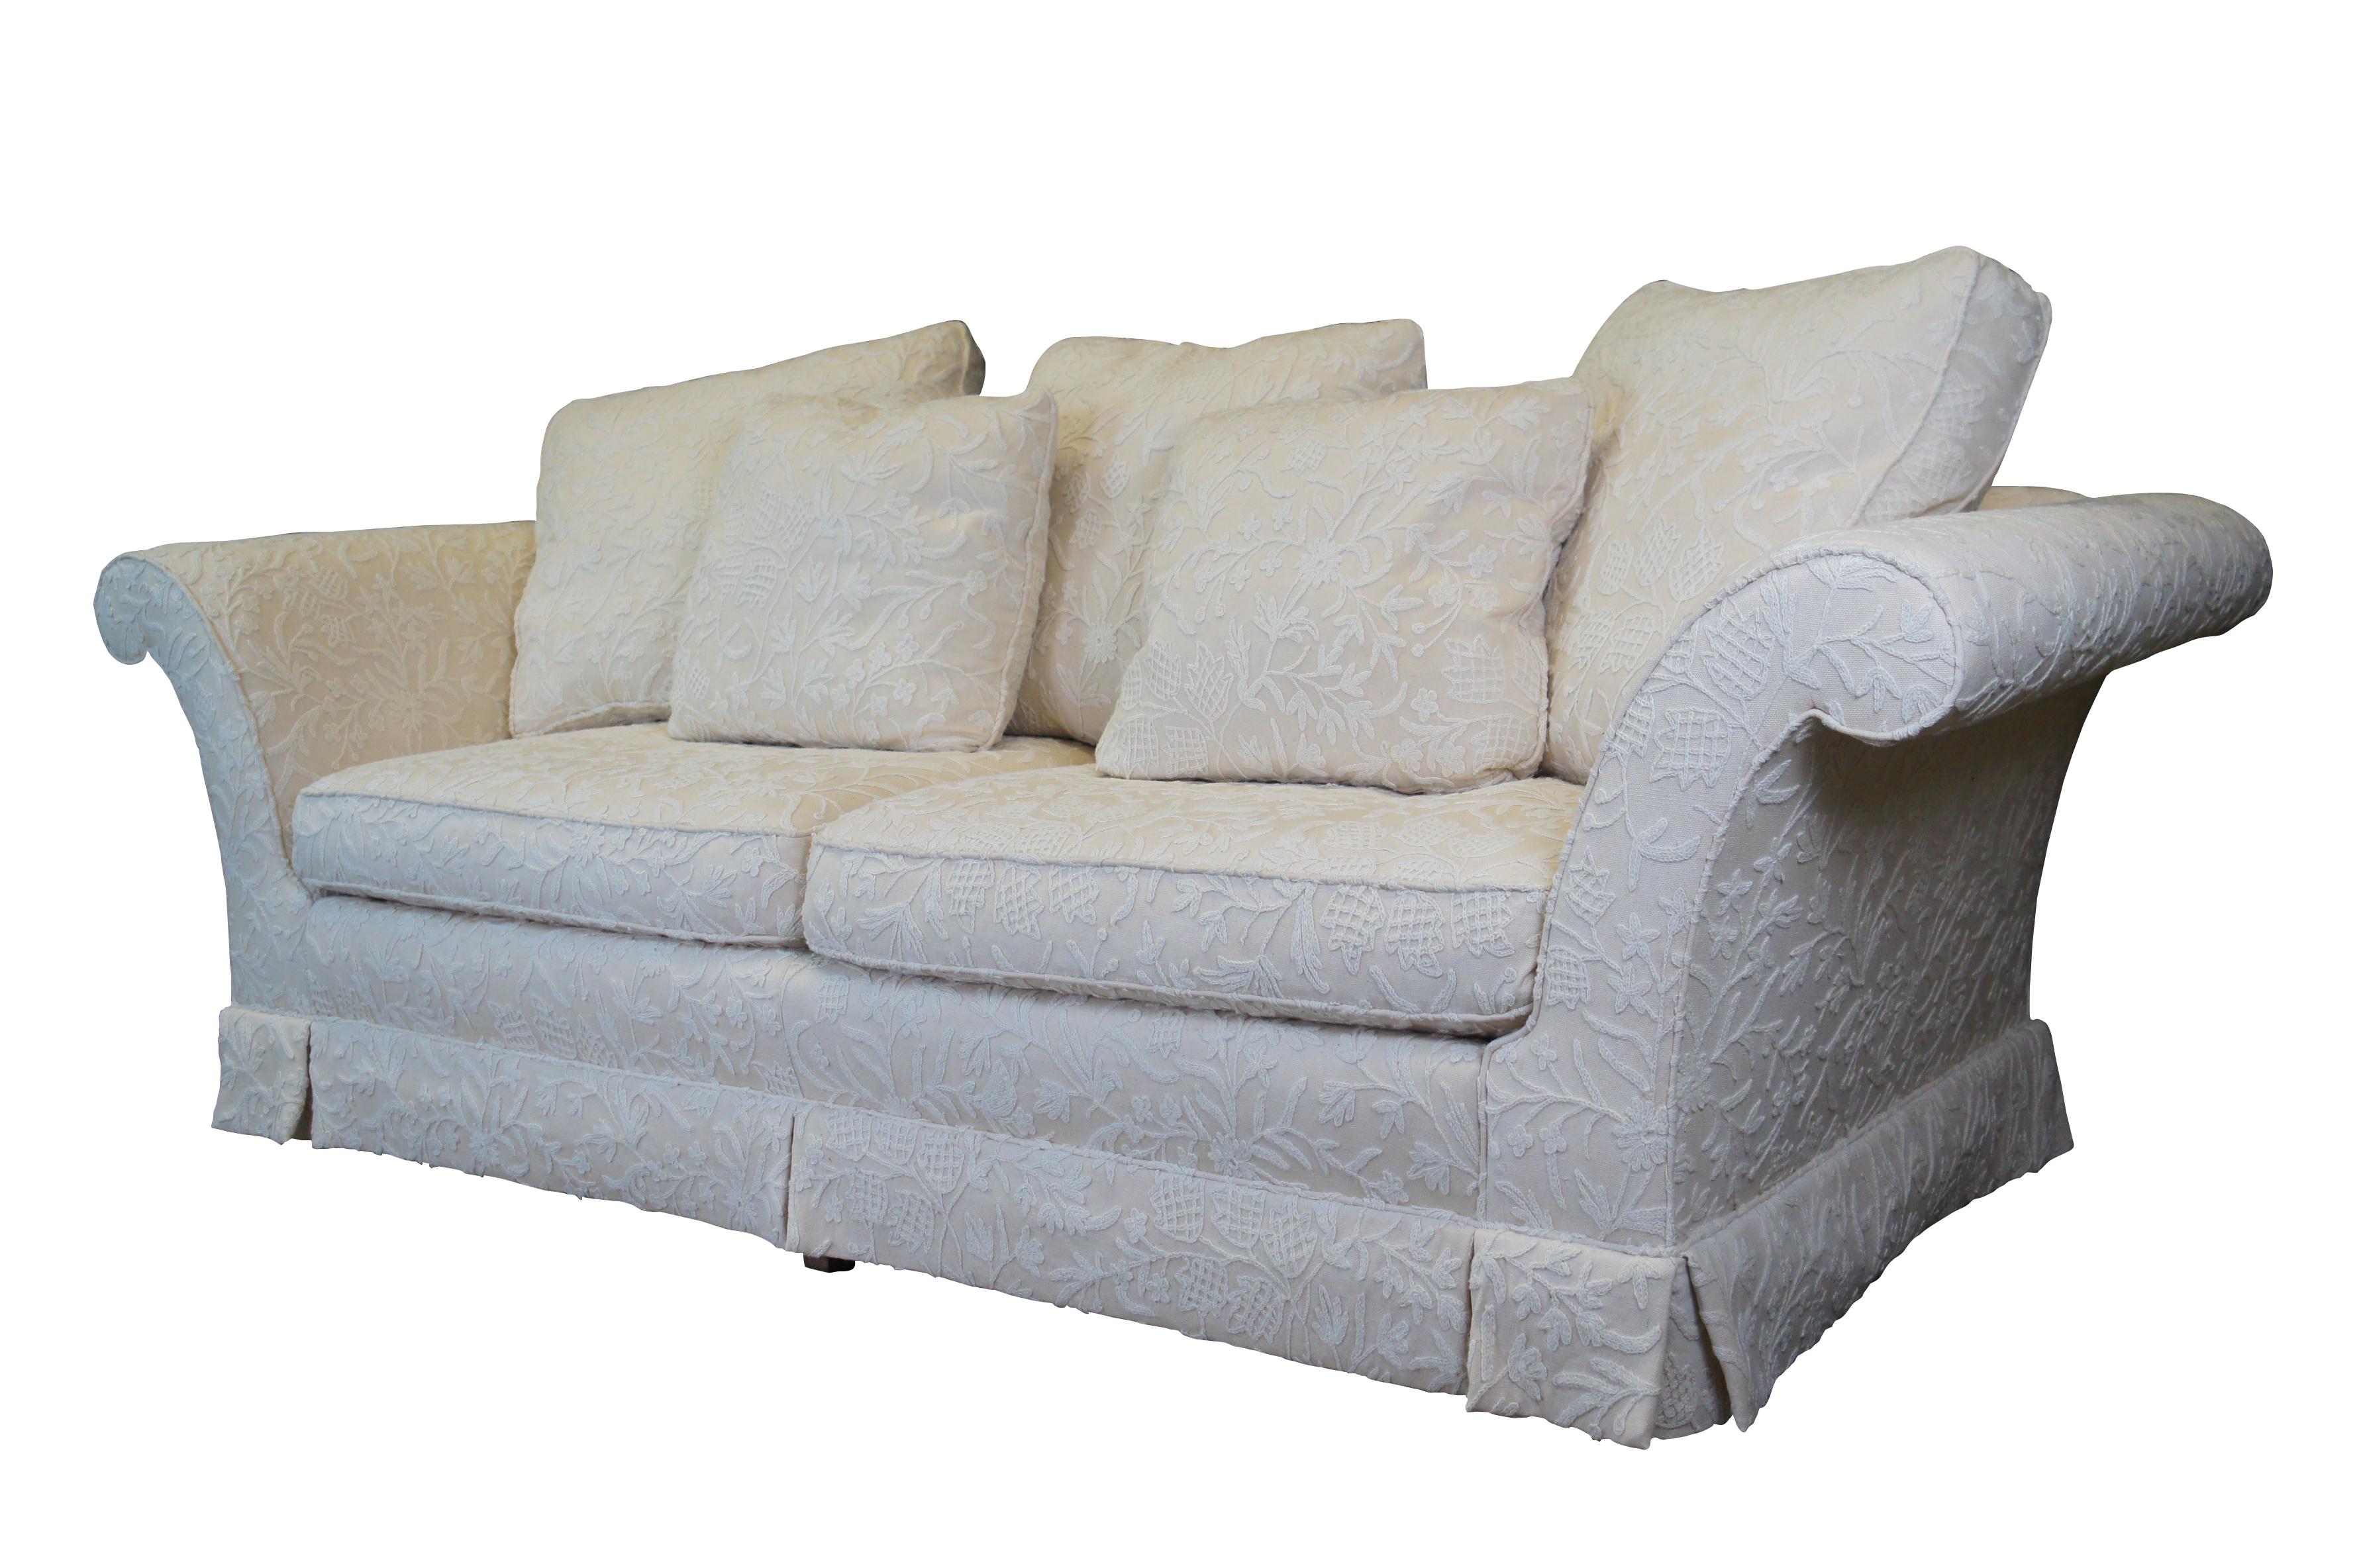 Baker Furniture George IV Skirted Sofa by Stately Homes, 886-86, circa 1990s.  A traditional form upholstered in ivory wool fabric with flared rolled arms and a straight back with slight contoured shoulders.  The sofa is supported by square tapered